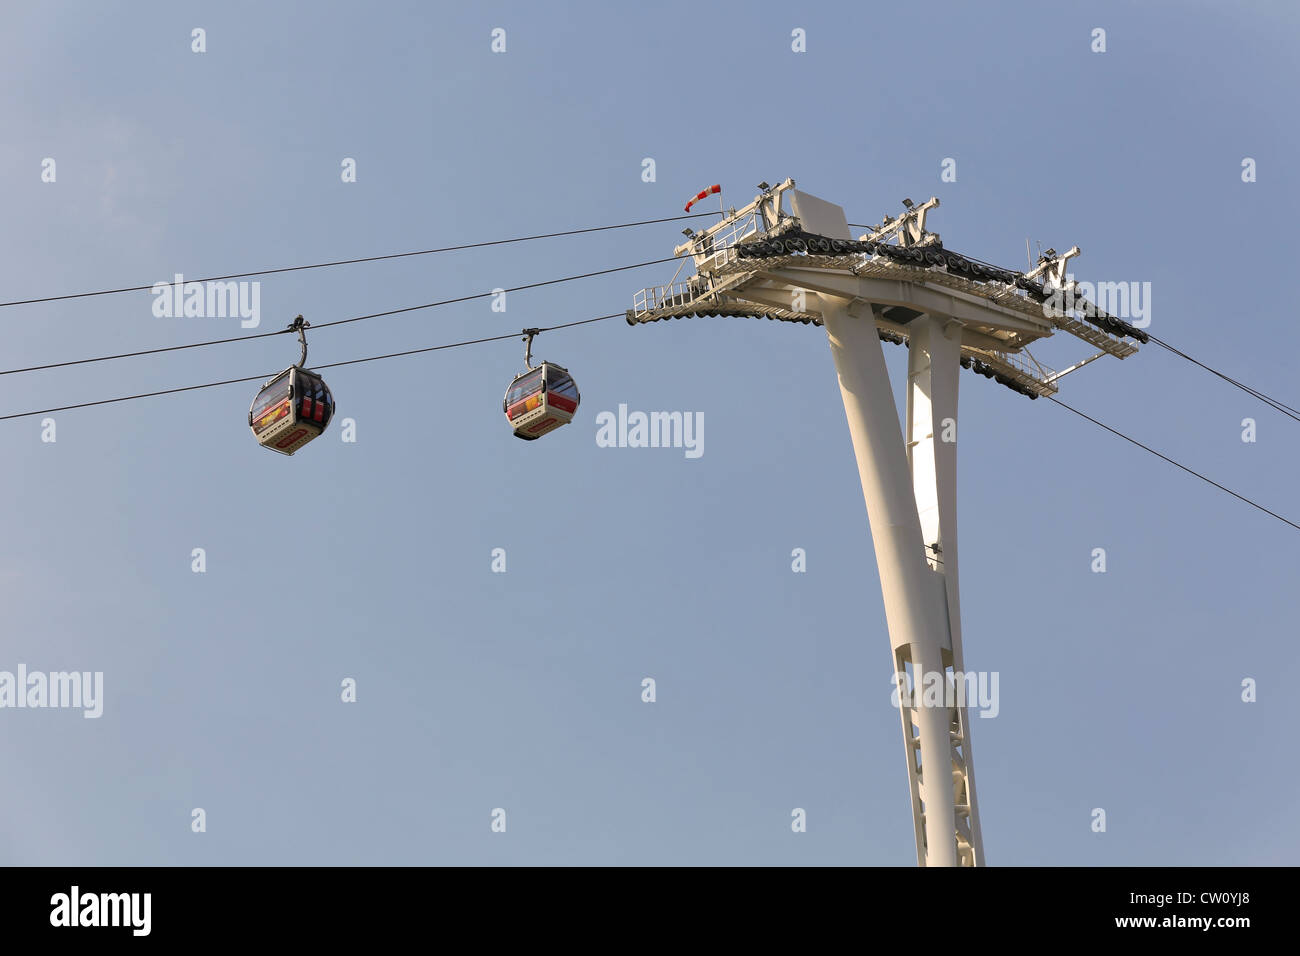 The Emirates Airline Stock Photo